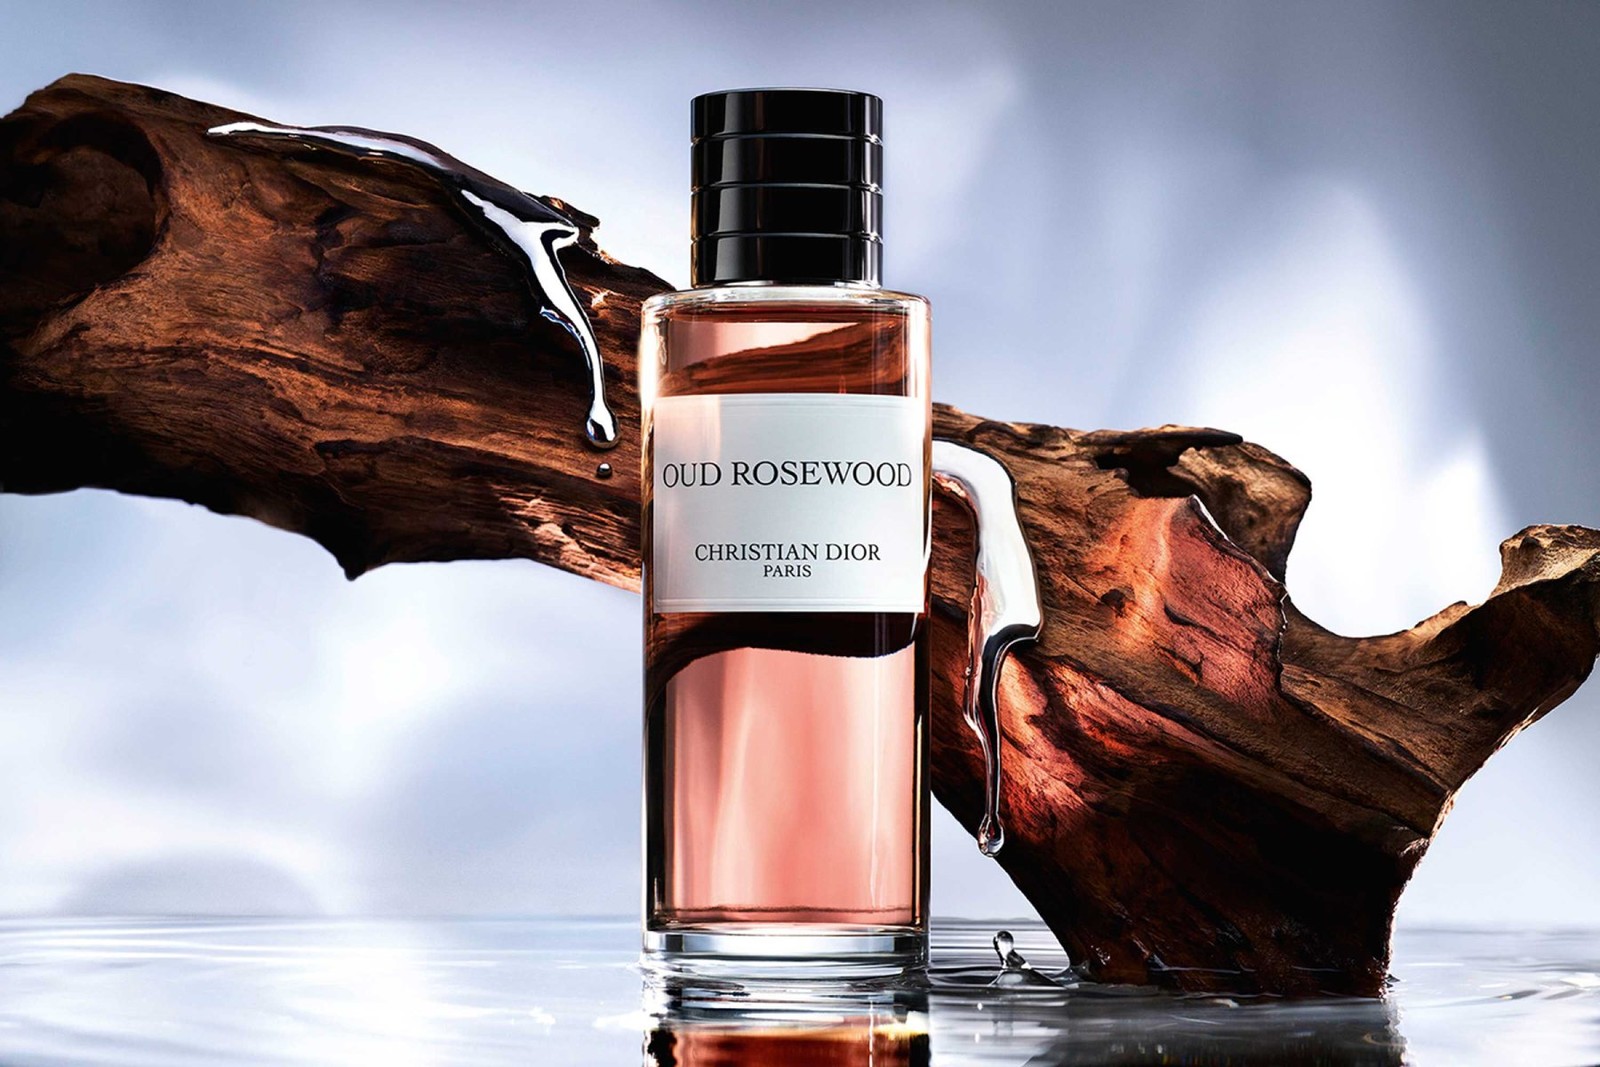 Oud Rosewood by Christian Dior